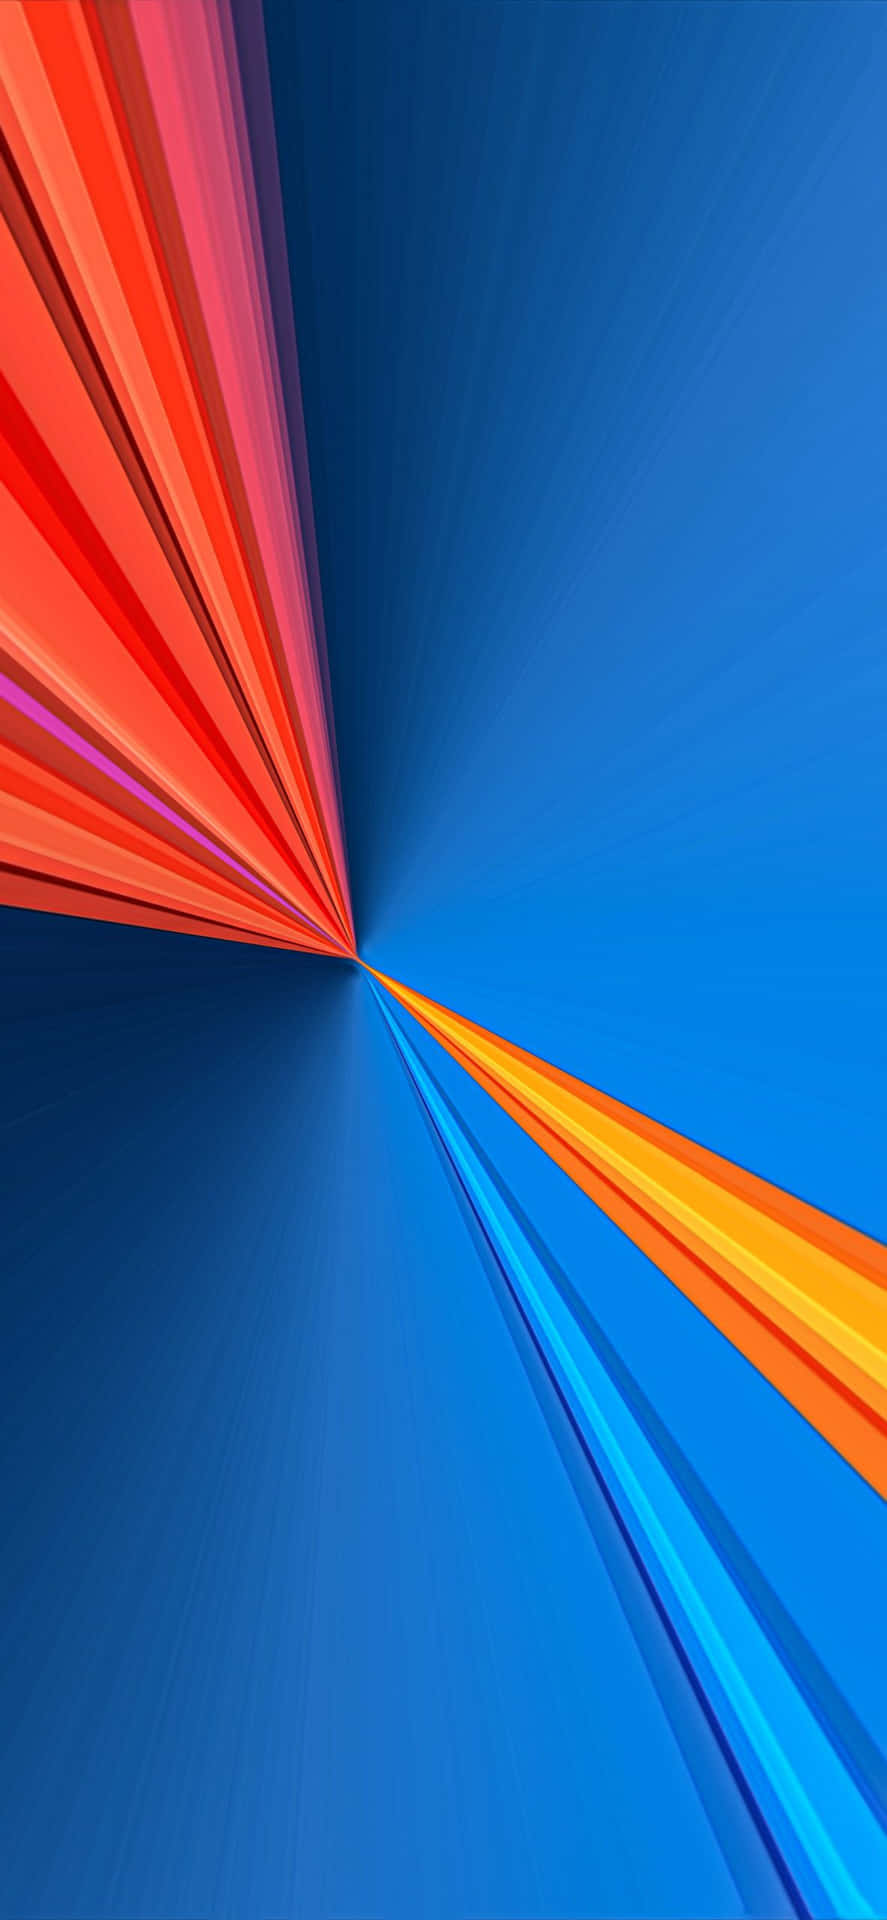 An Abstract Blue And Orange Background With A Blue And Orange Line Wallpaper